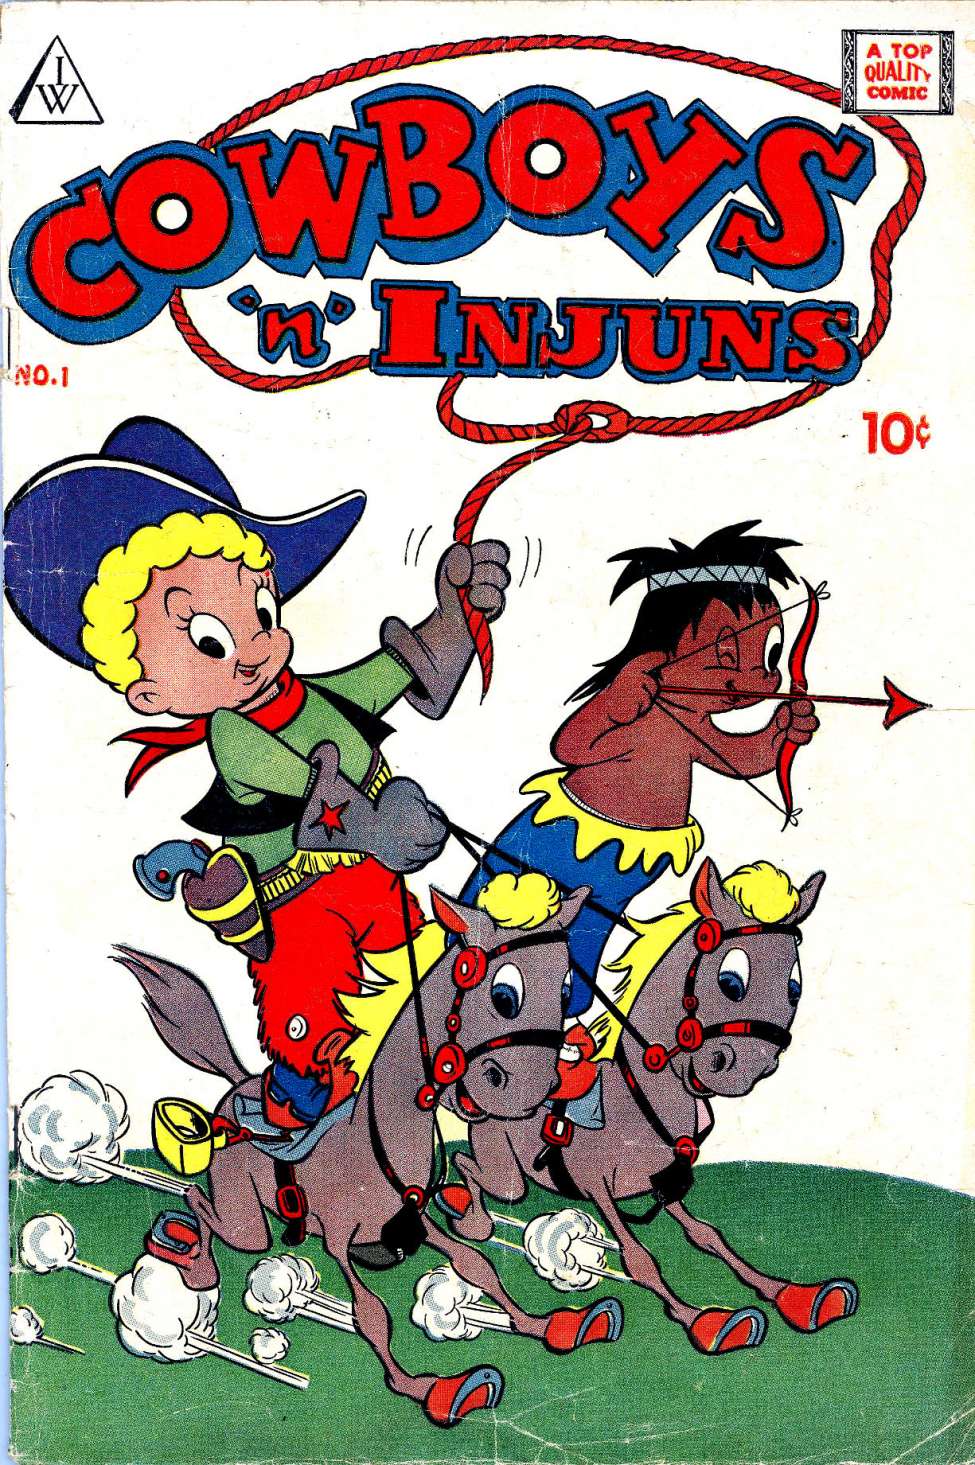 Comic Book Cover For Cowboys 'N' Injuns 1